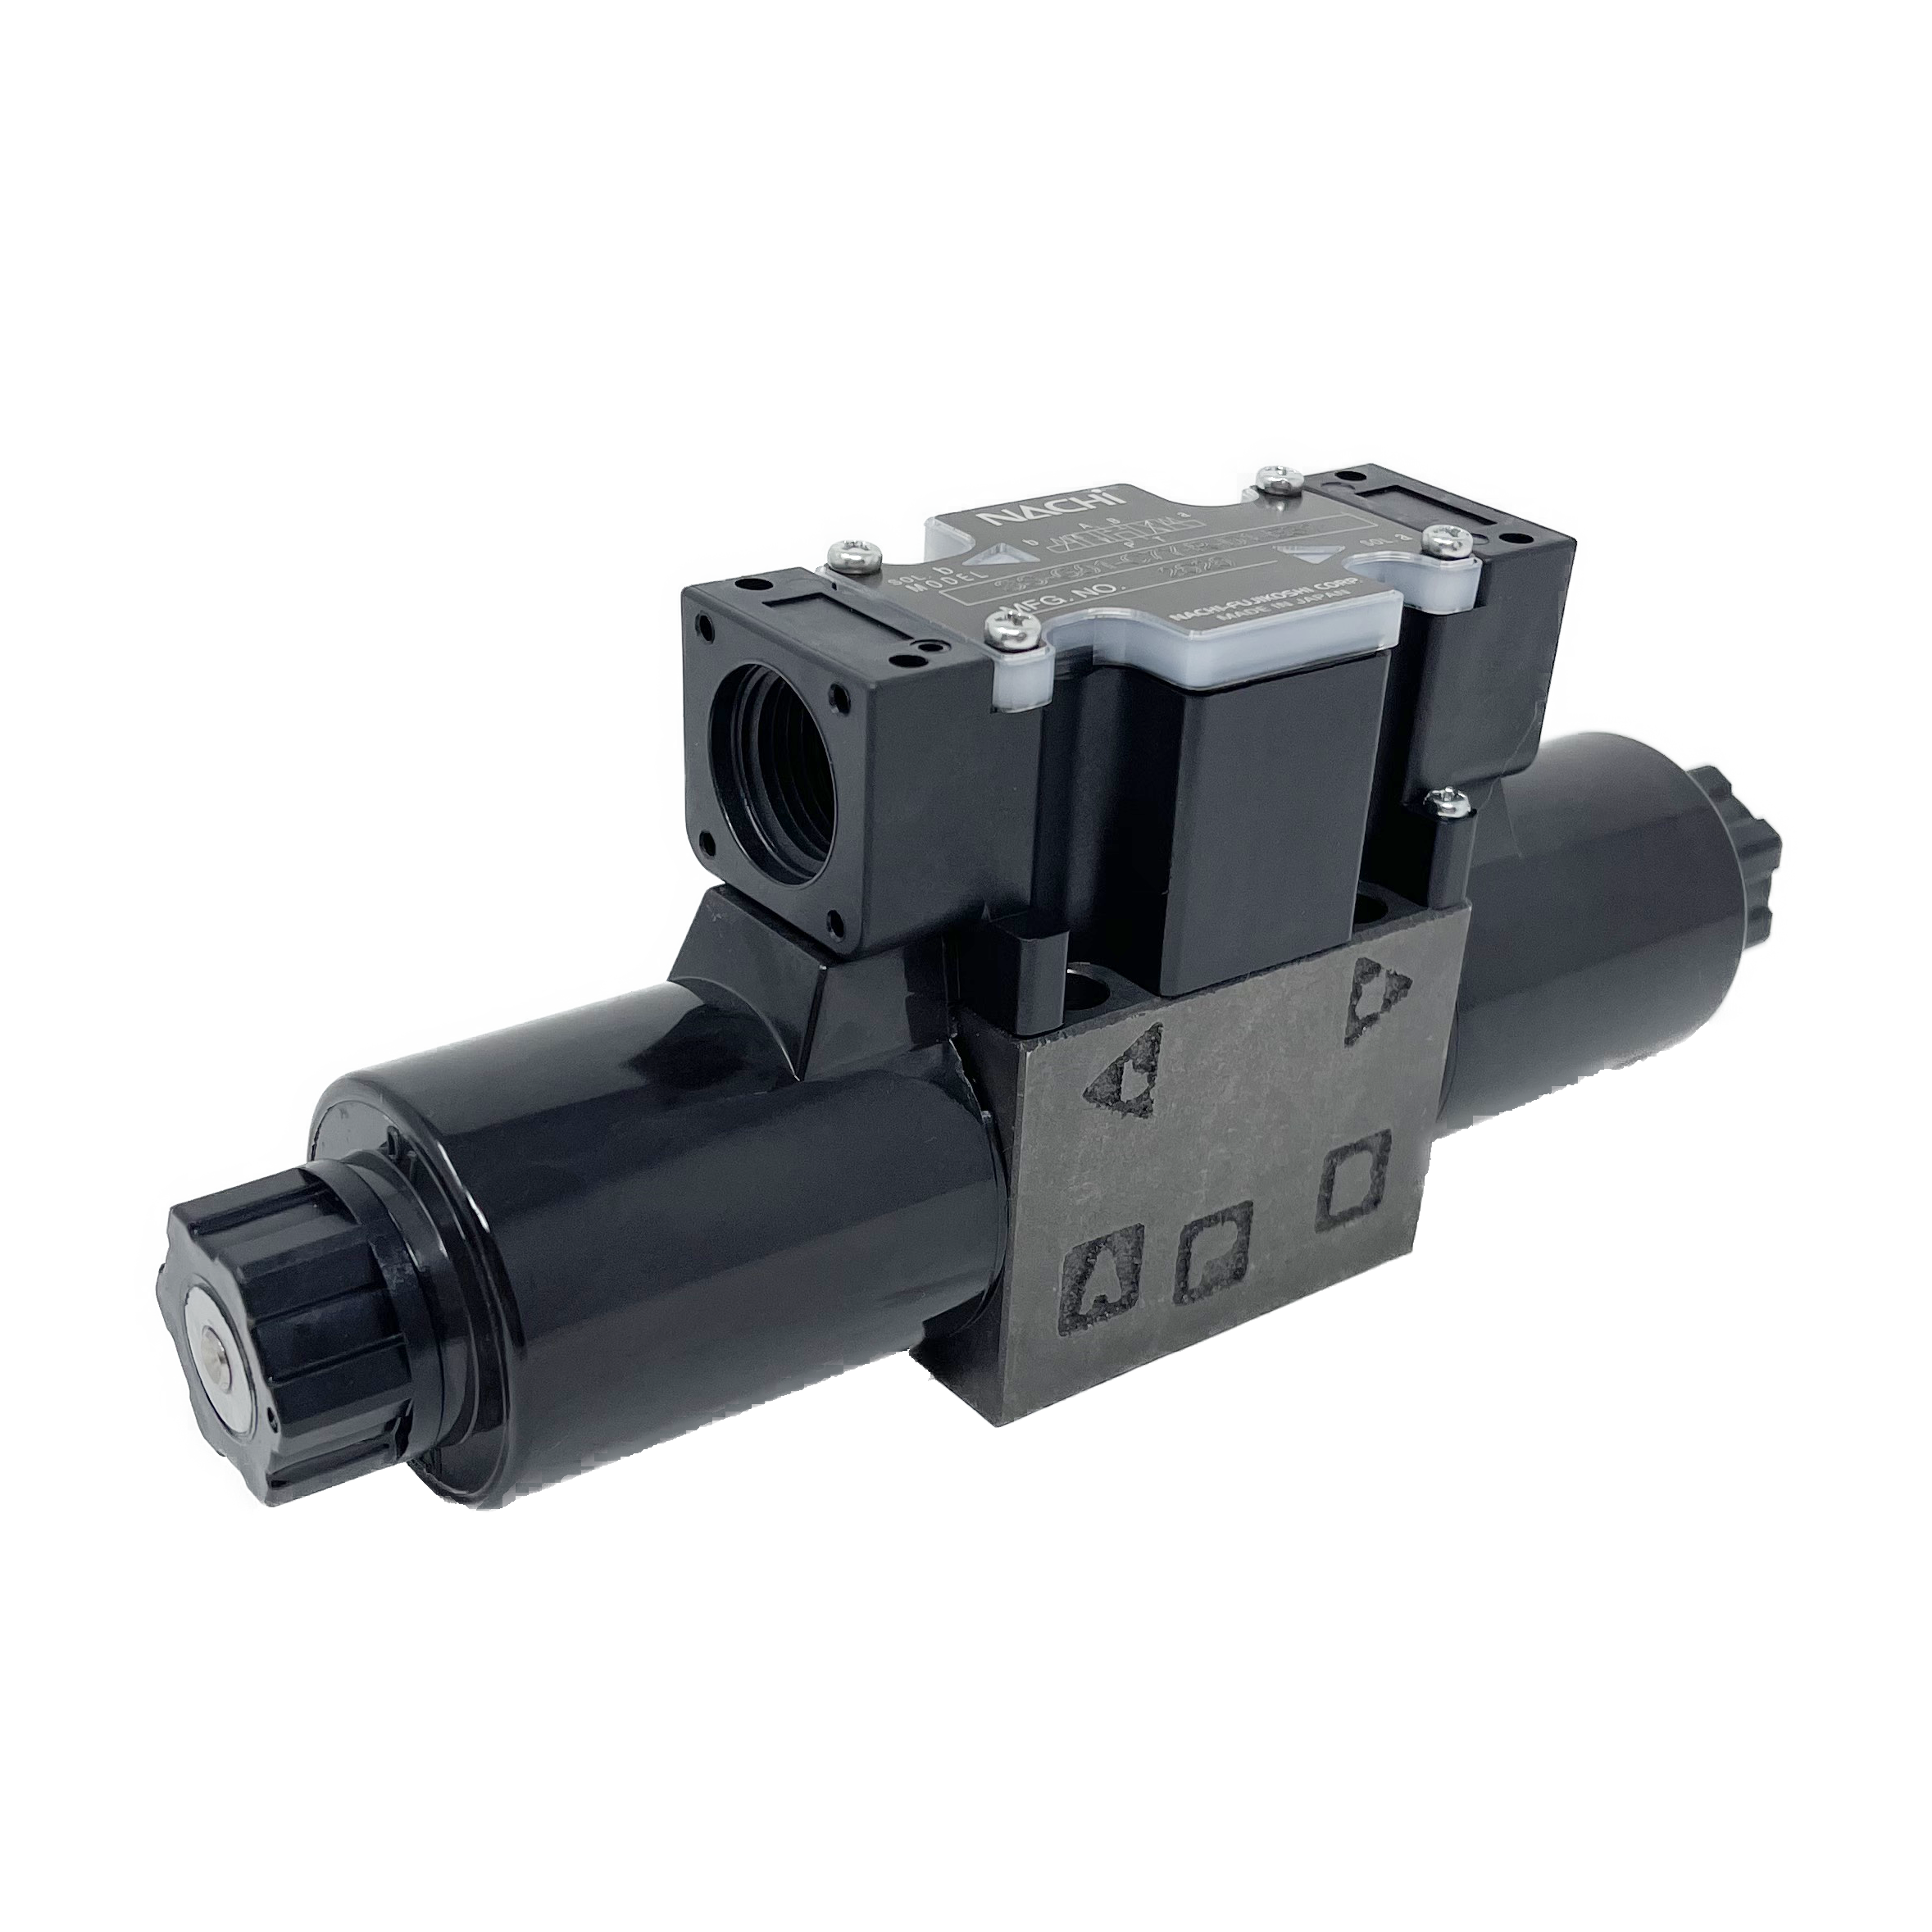 SS-G01-C7Y-R-D1-E31 : Nachi Solenoid Valve, 3P4W, D03 (NG6), 13.2GPM, 5075psi, P to T with A & B Blocked in Neutral, 12 VDC, Wiring Box with Lights